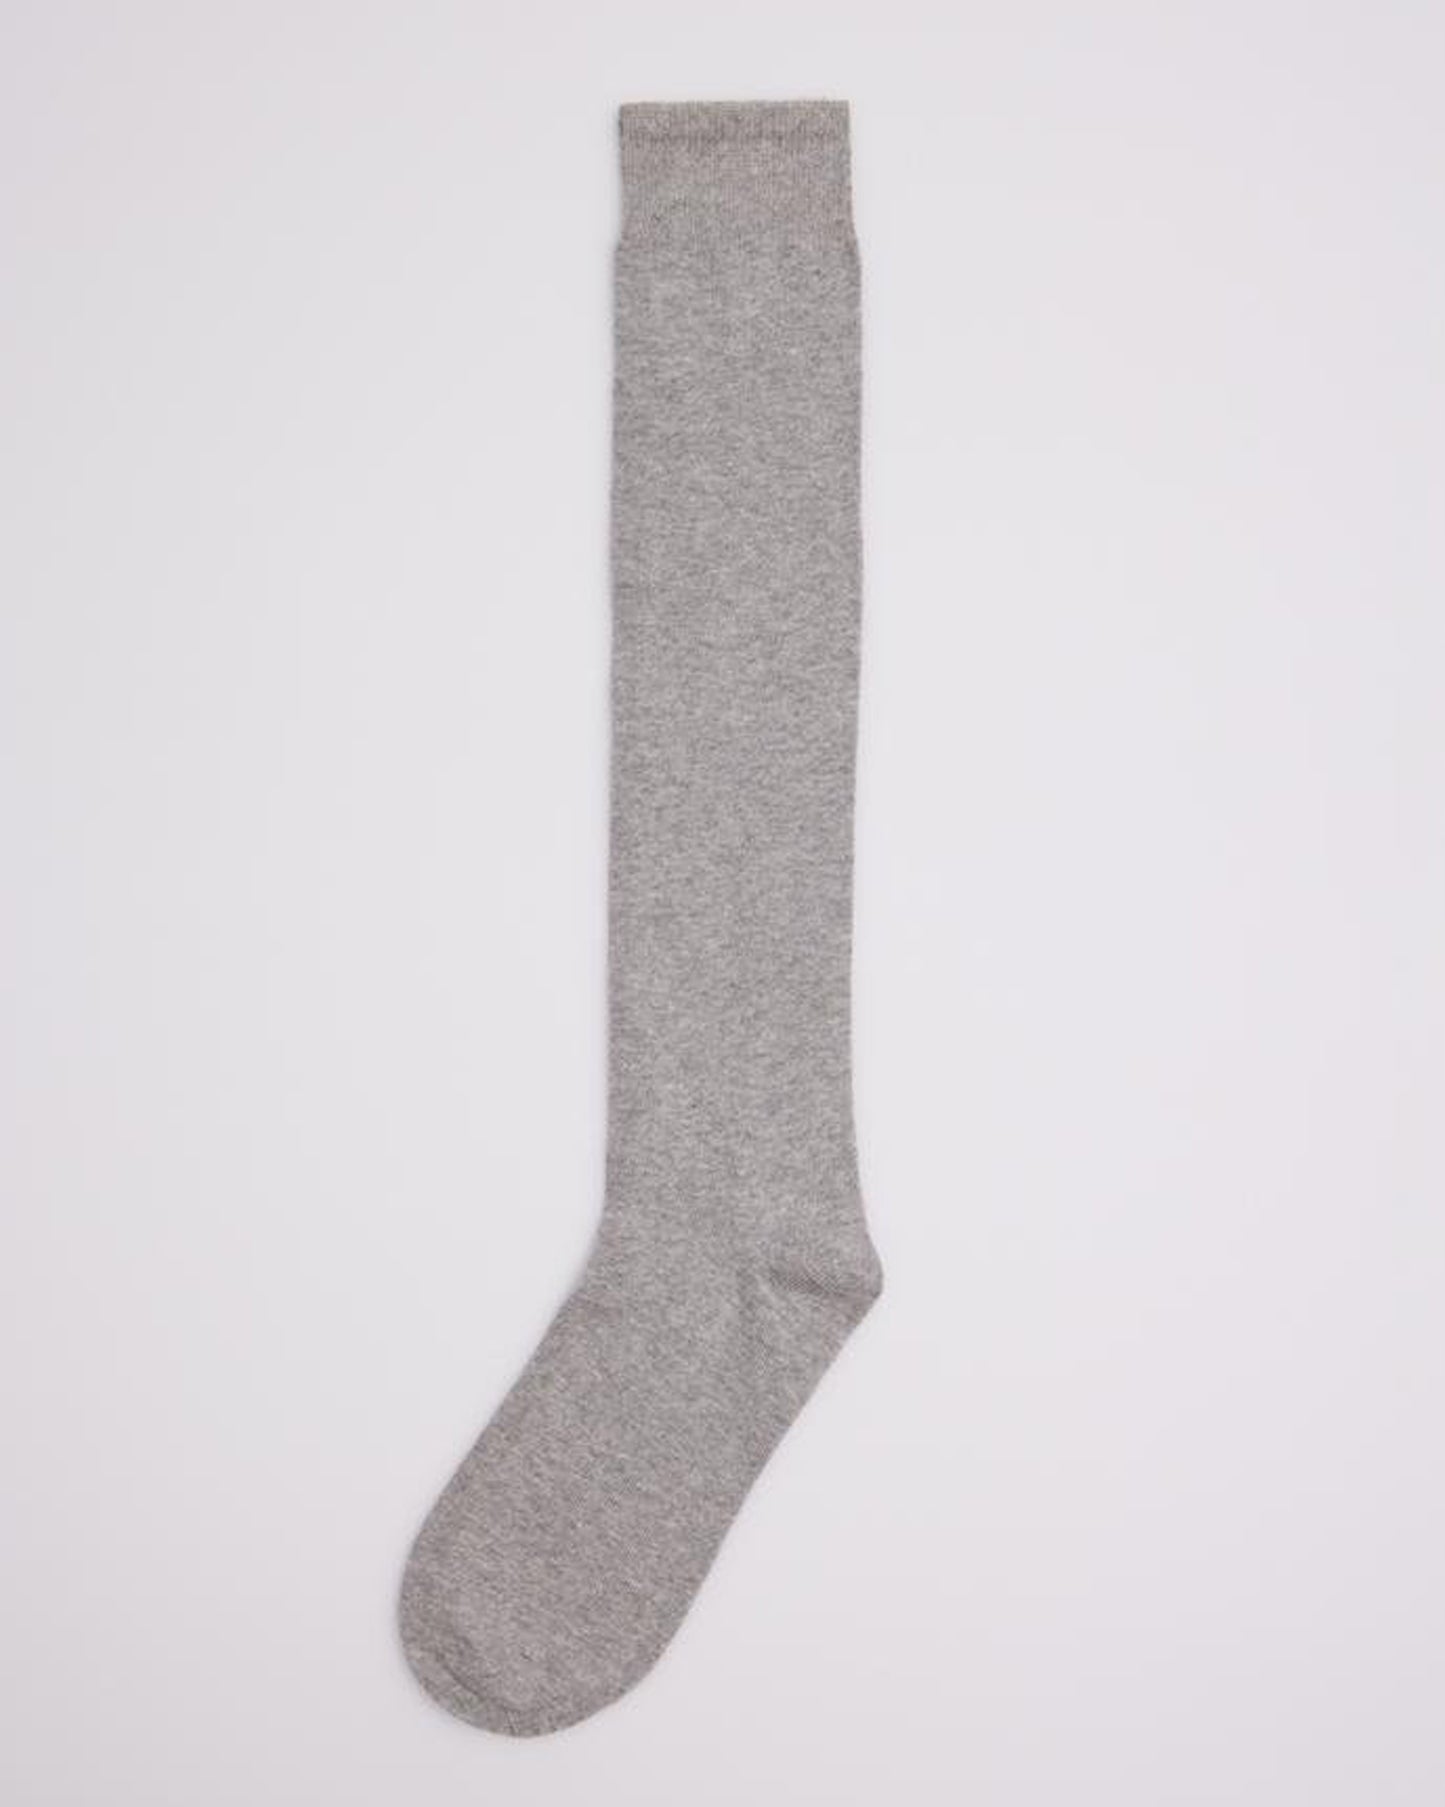 Ysabel Mora 12374 Cotton Knee-Highs - Light grey cotton knee-high socks with an elasticated comfort cuff, flat toe seams and shaped heel.